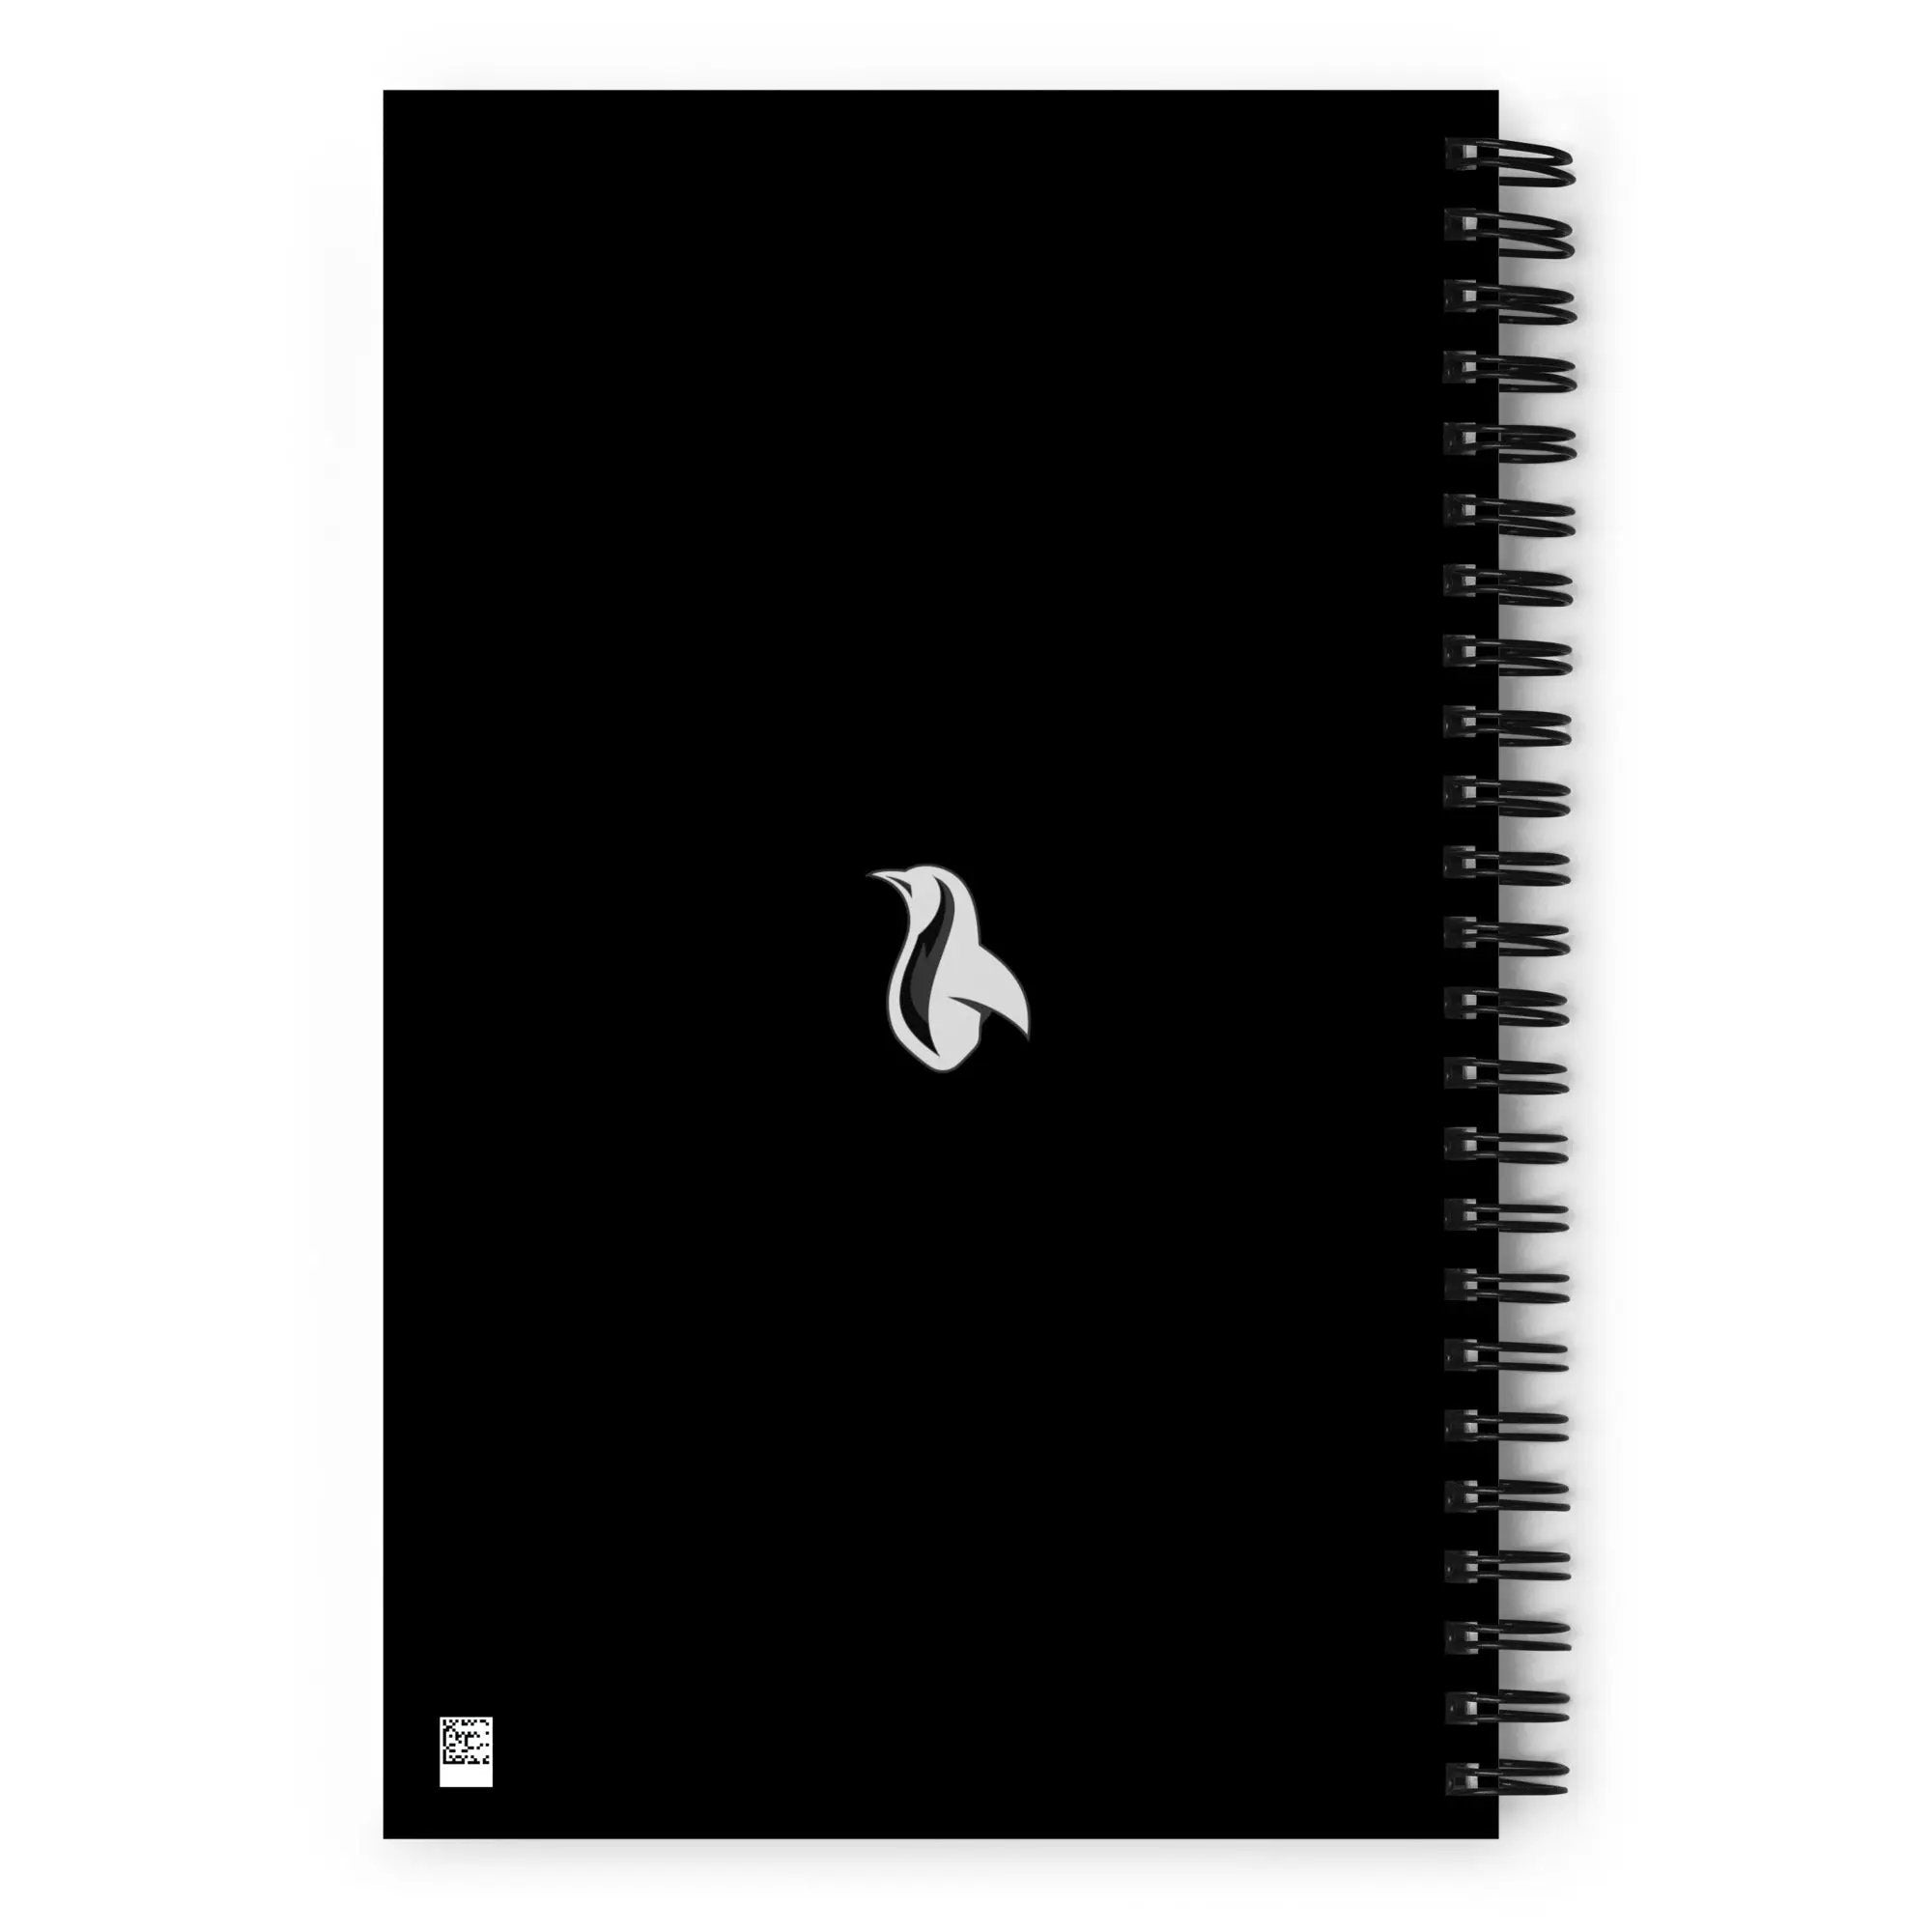 The Monster Squad "Dracula" Spiral notebook